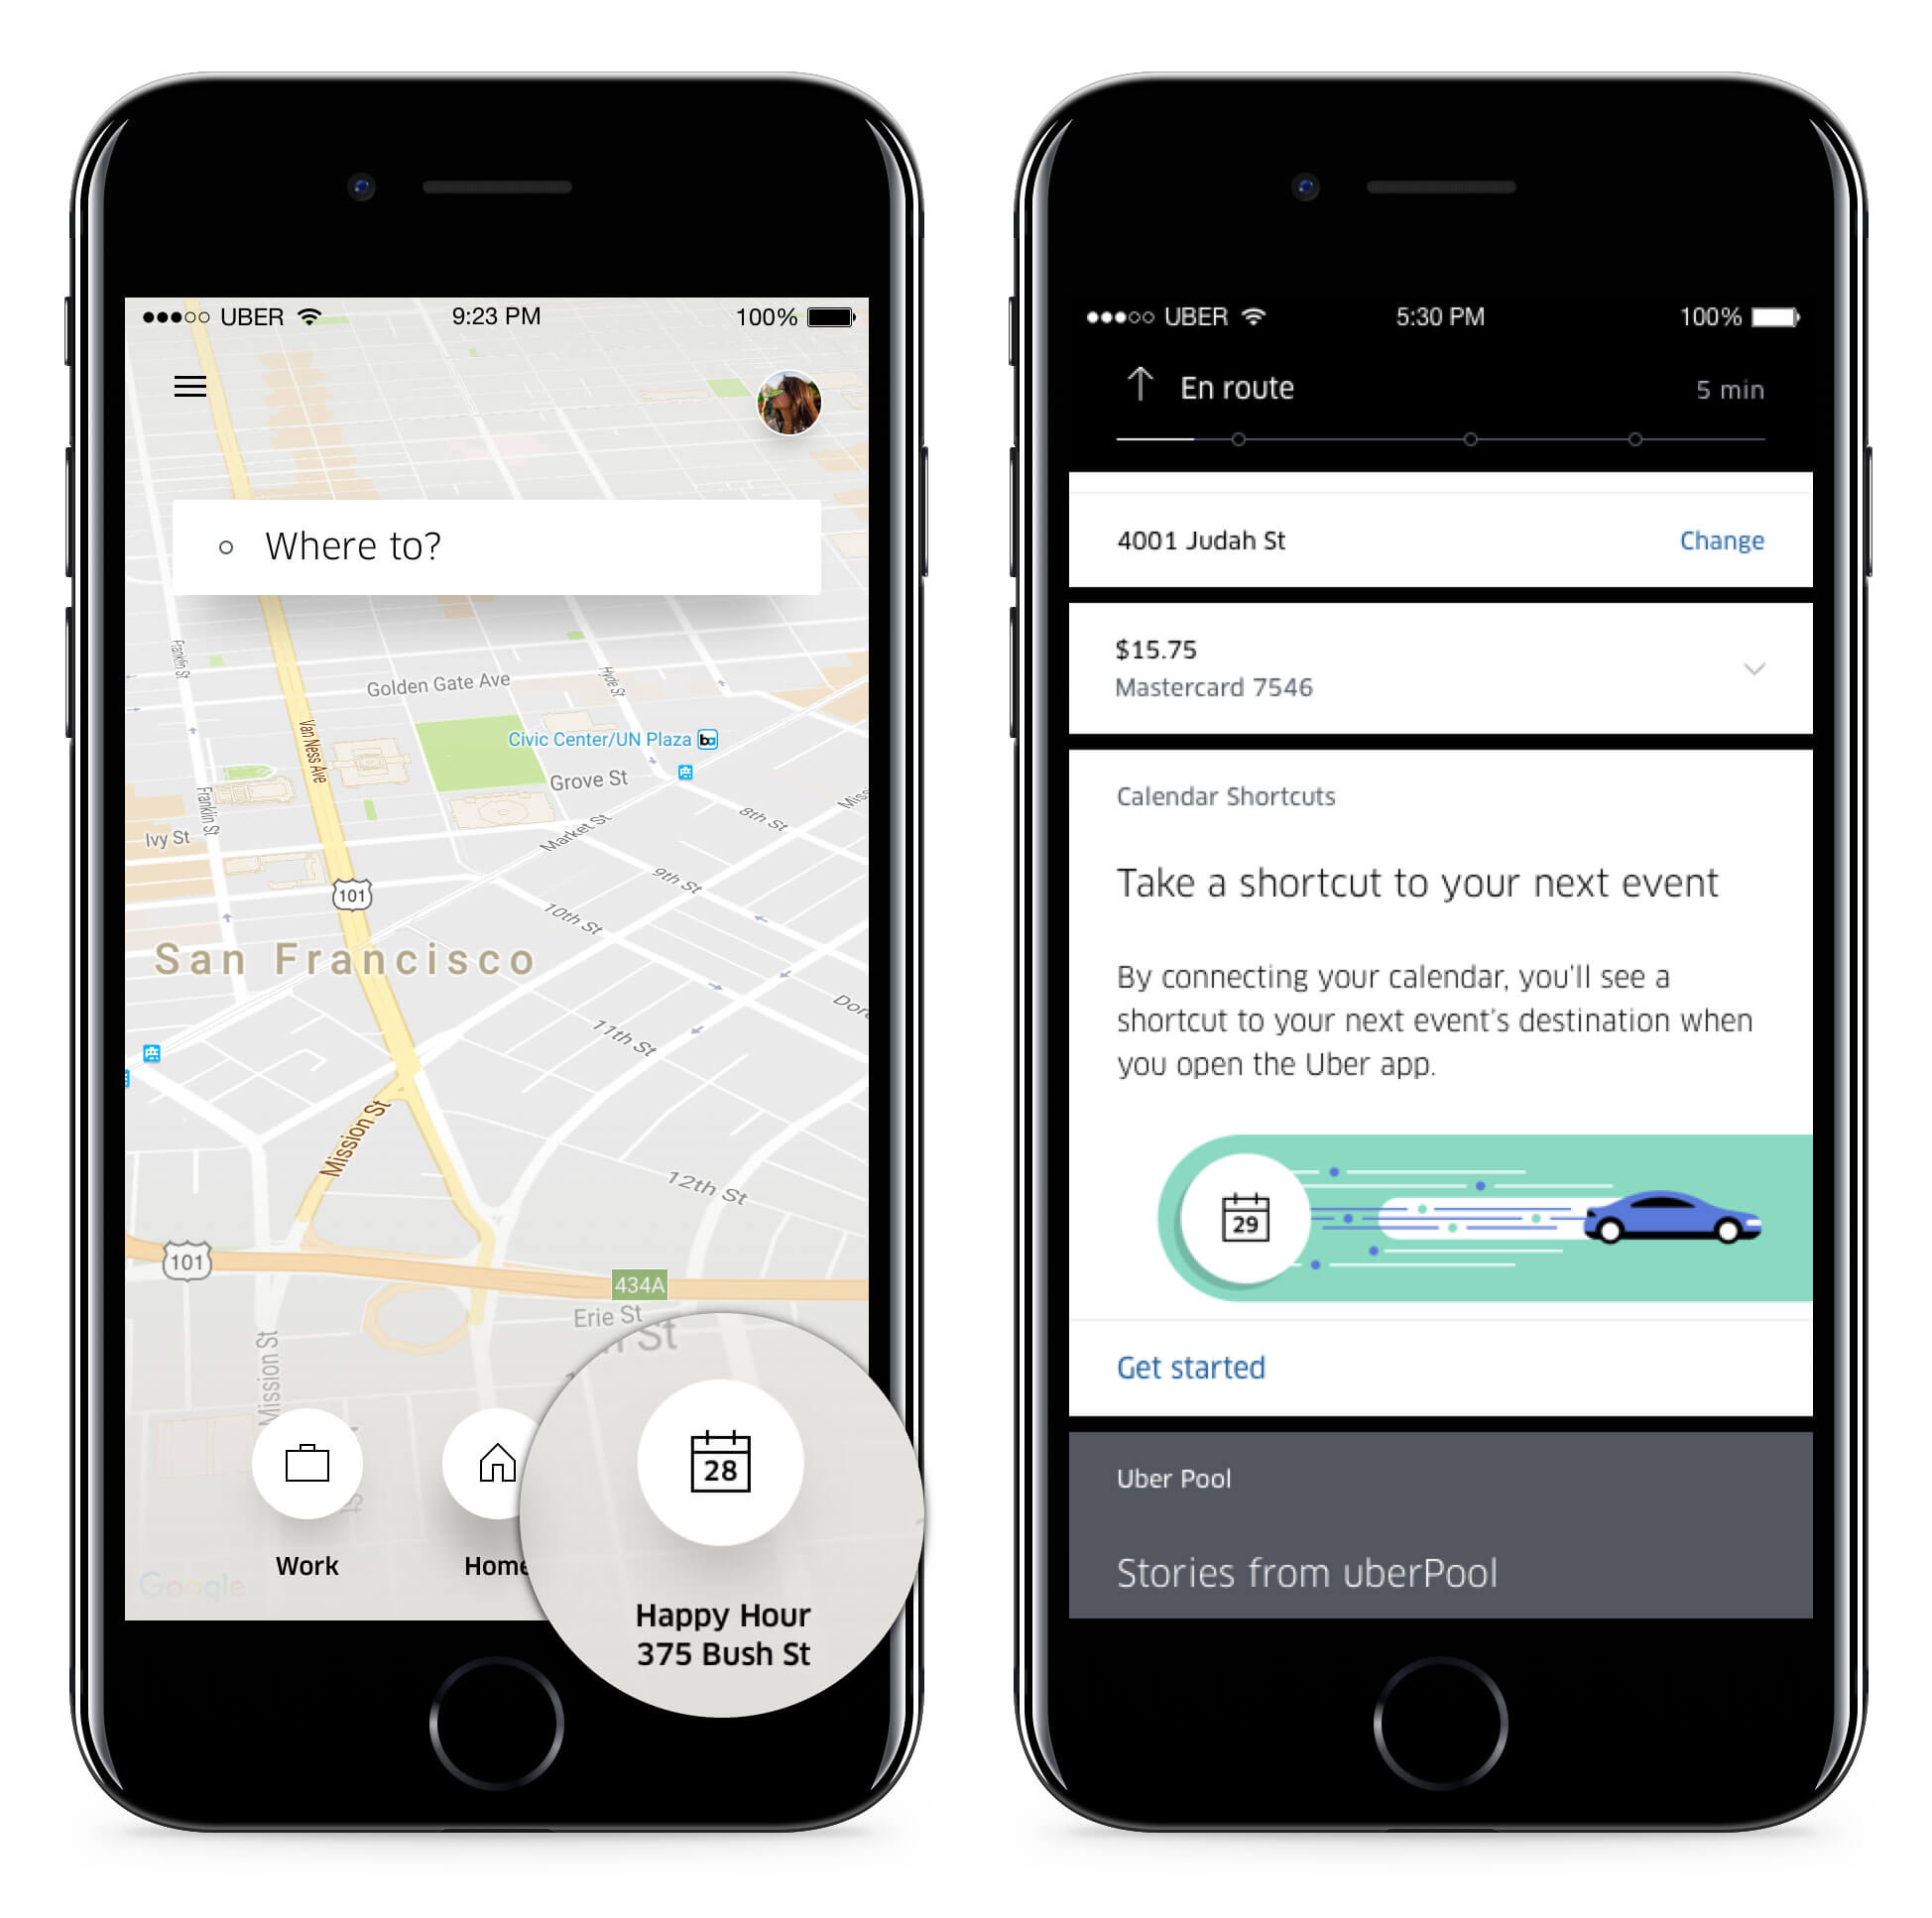 Syncing your phone's calendar with Uber will surface locations where you need to go.